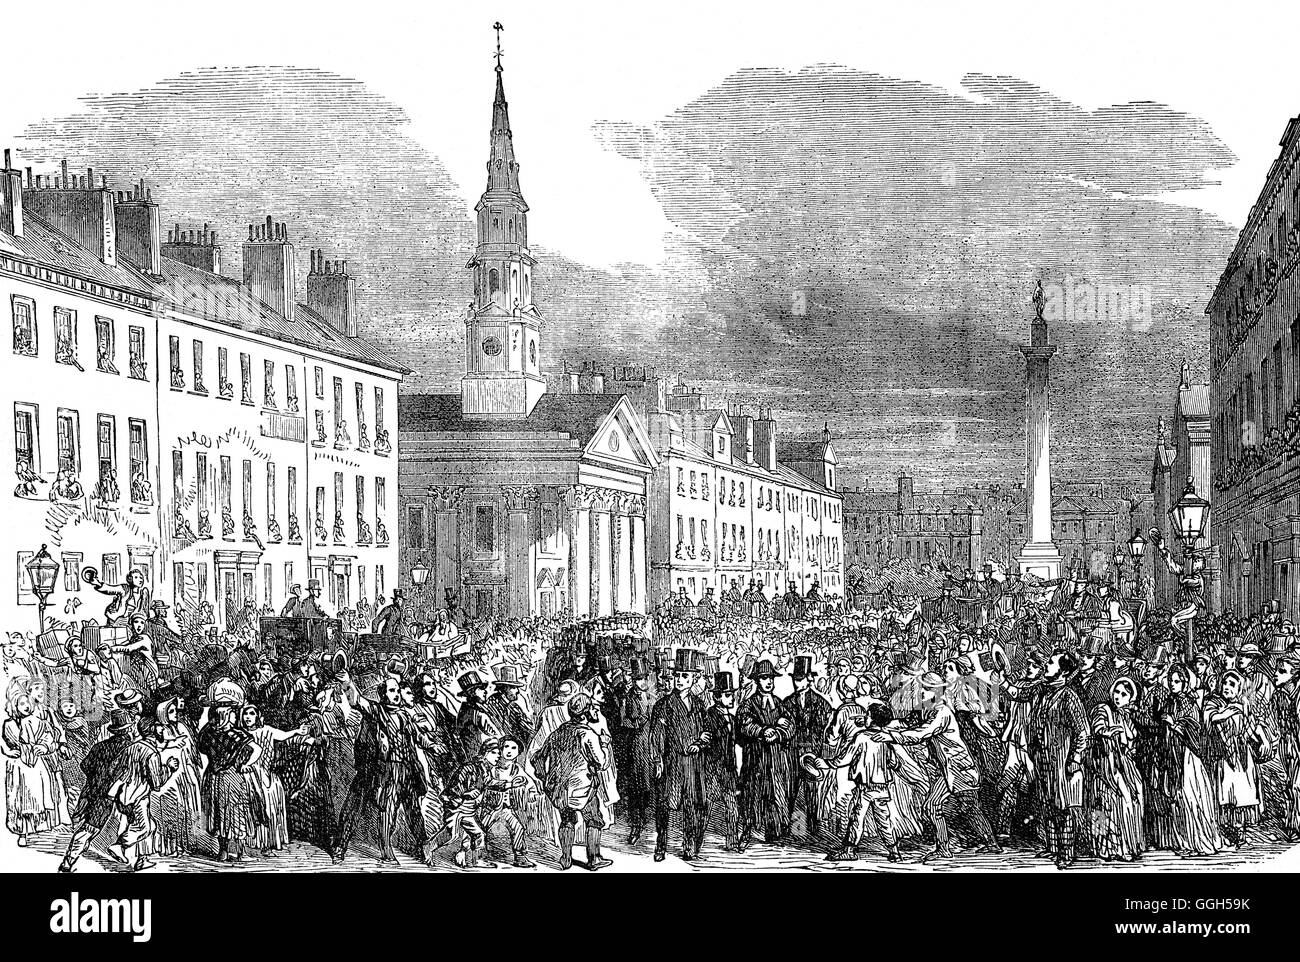 Procession of seceding ministers from St Andrews Church in Edinburgh, Scotland during the Disruption of 1843. Fuelled by increasing concern and resentment about the Civil Courts' infringements on the liberties of the Church of Scotland, around one third of the ministers present at the annual church's General Assembly walked out, cheered by onlookers outside, and constituted the Free Church of Scotland. Stock Photo